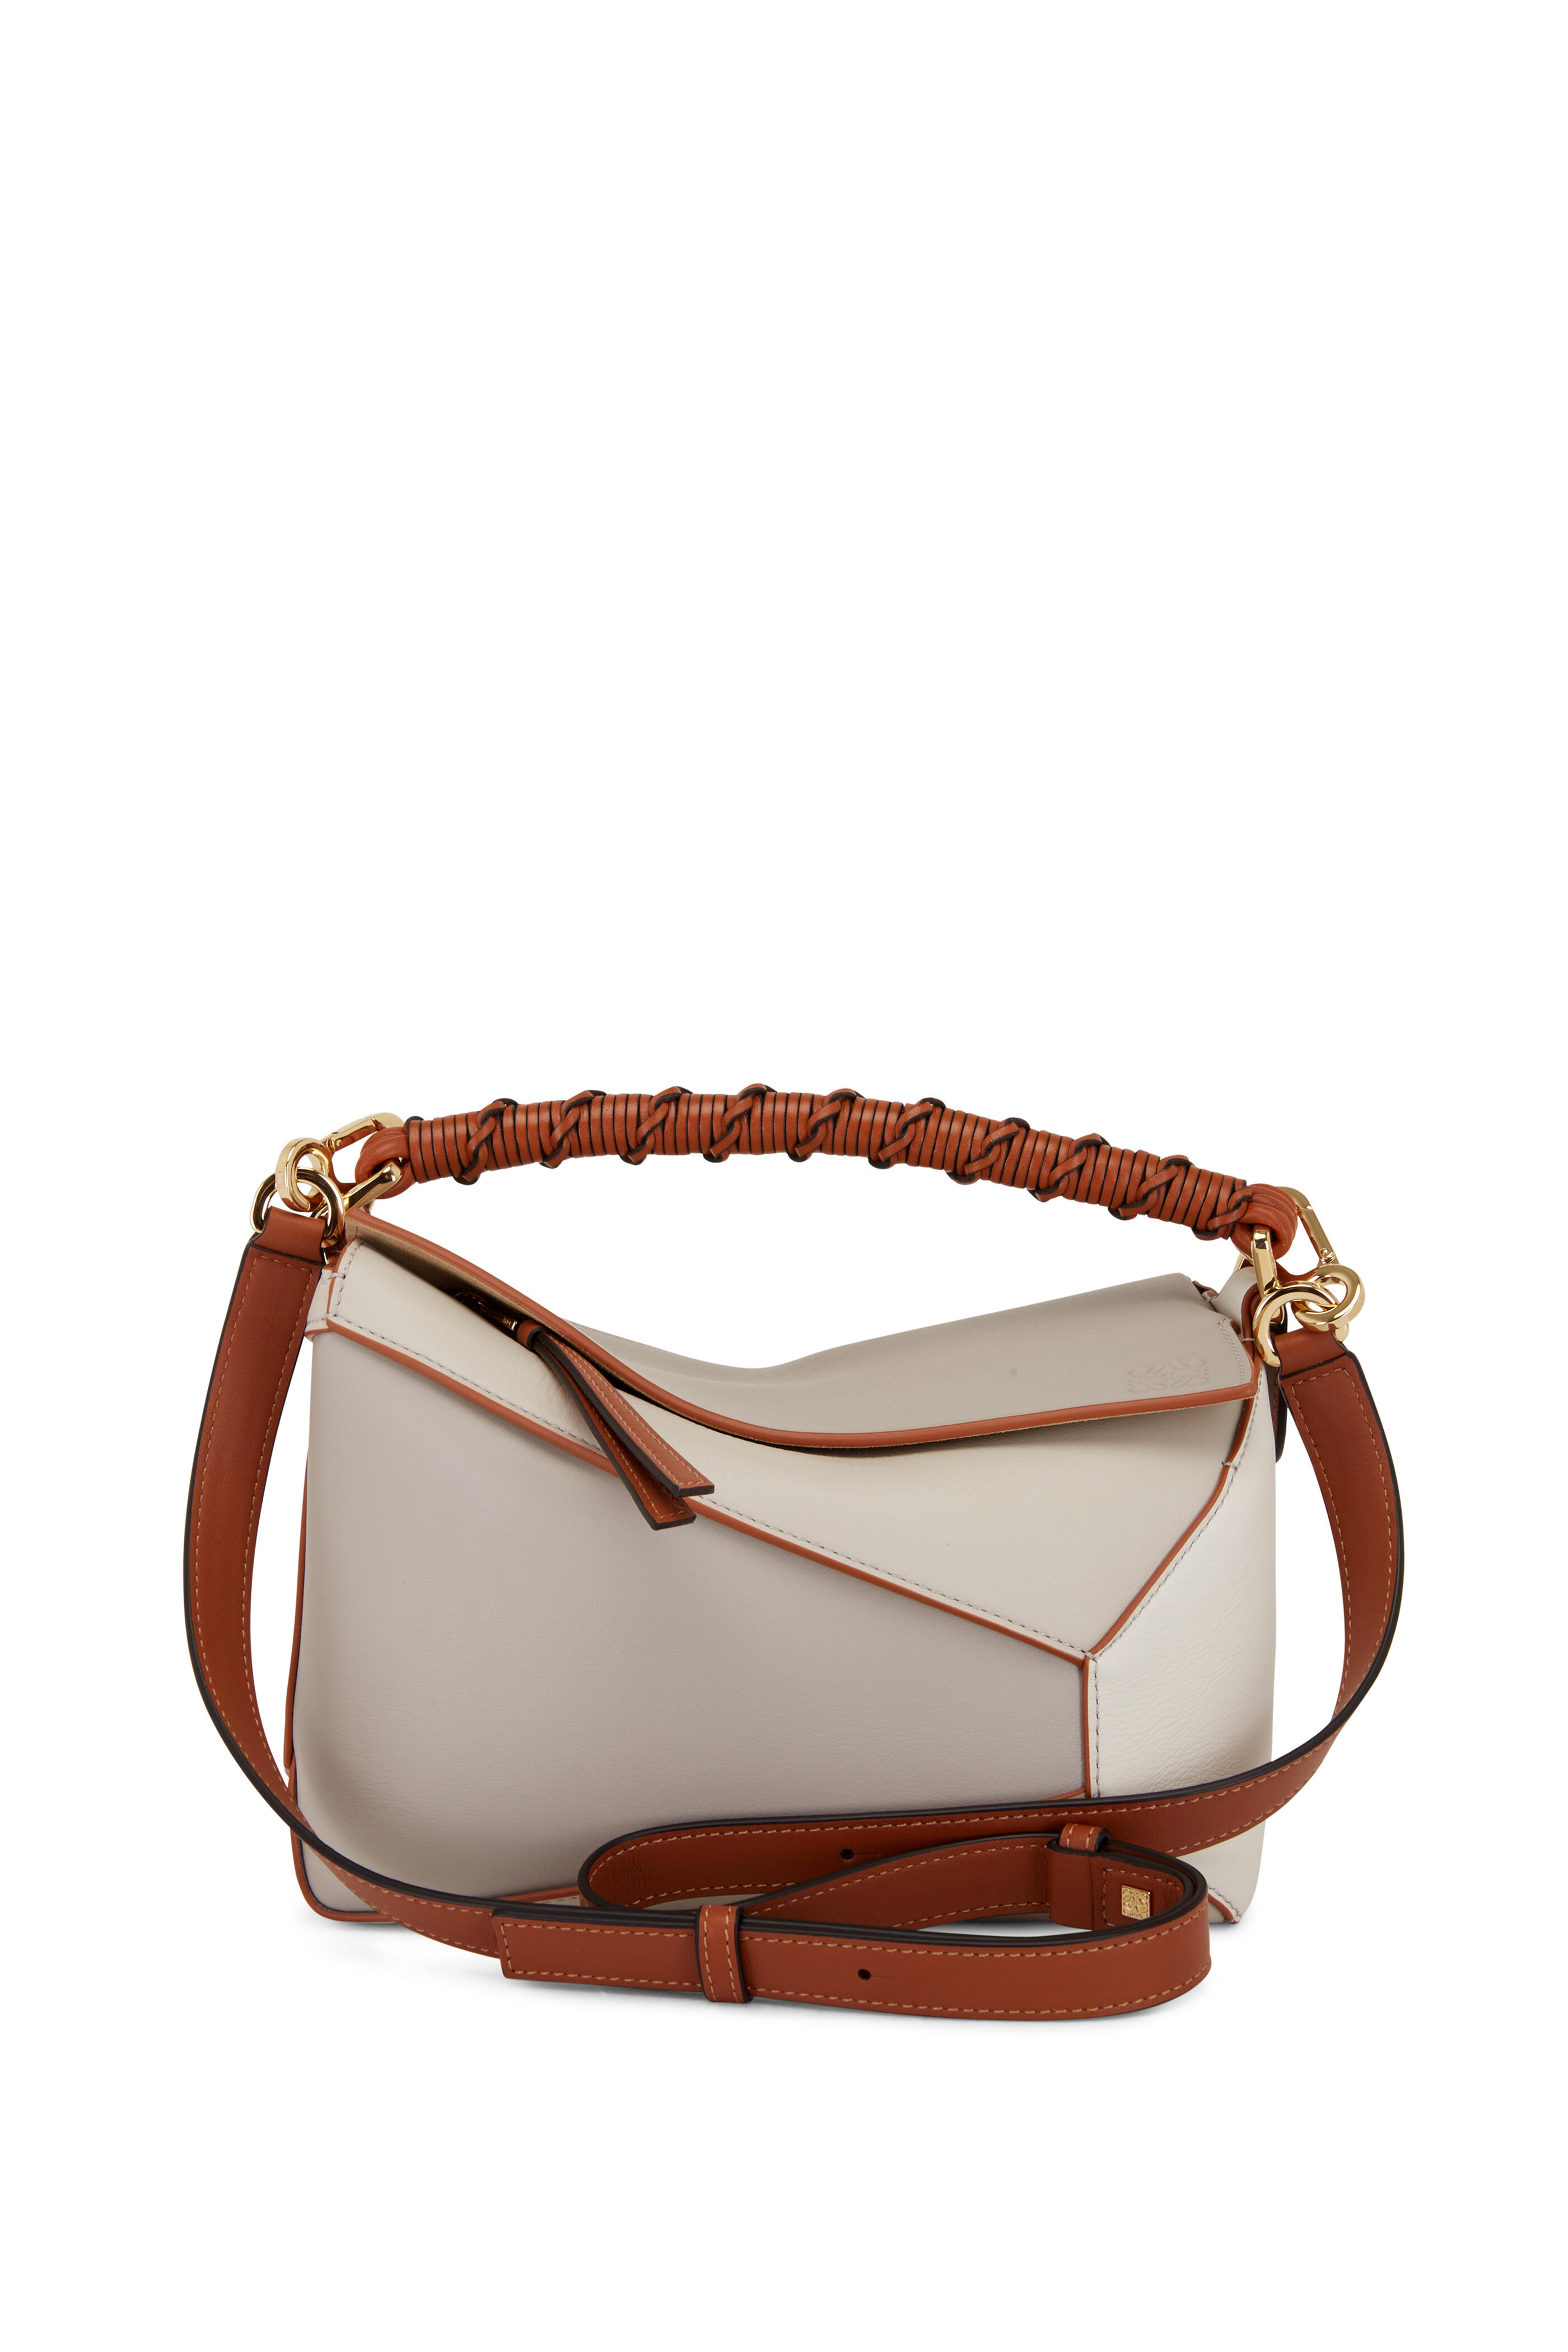 LOEWE Puzzle Edge small leather shoulder bag